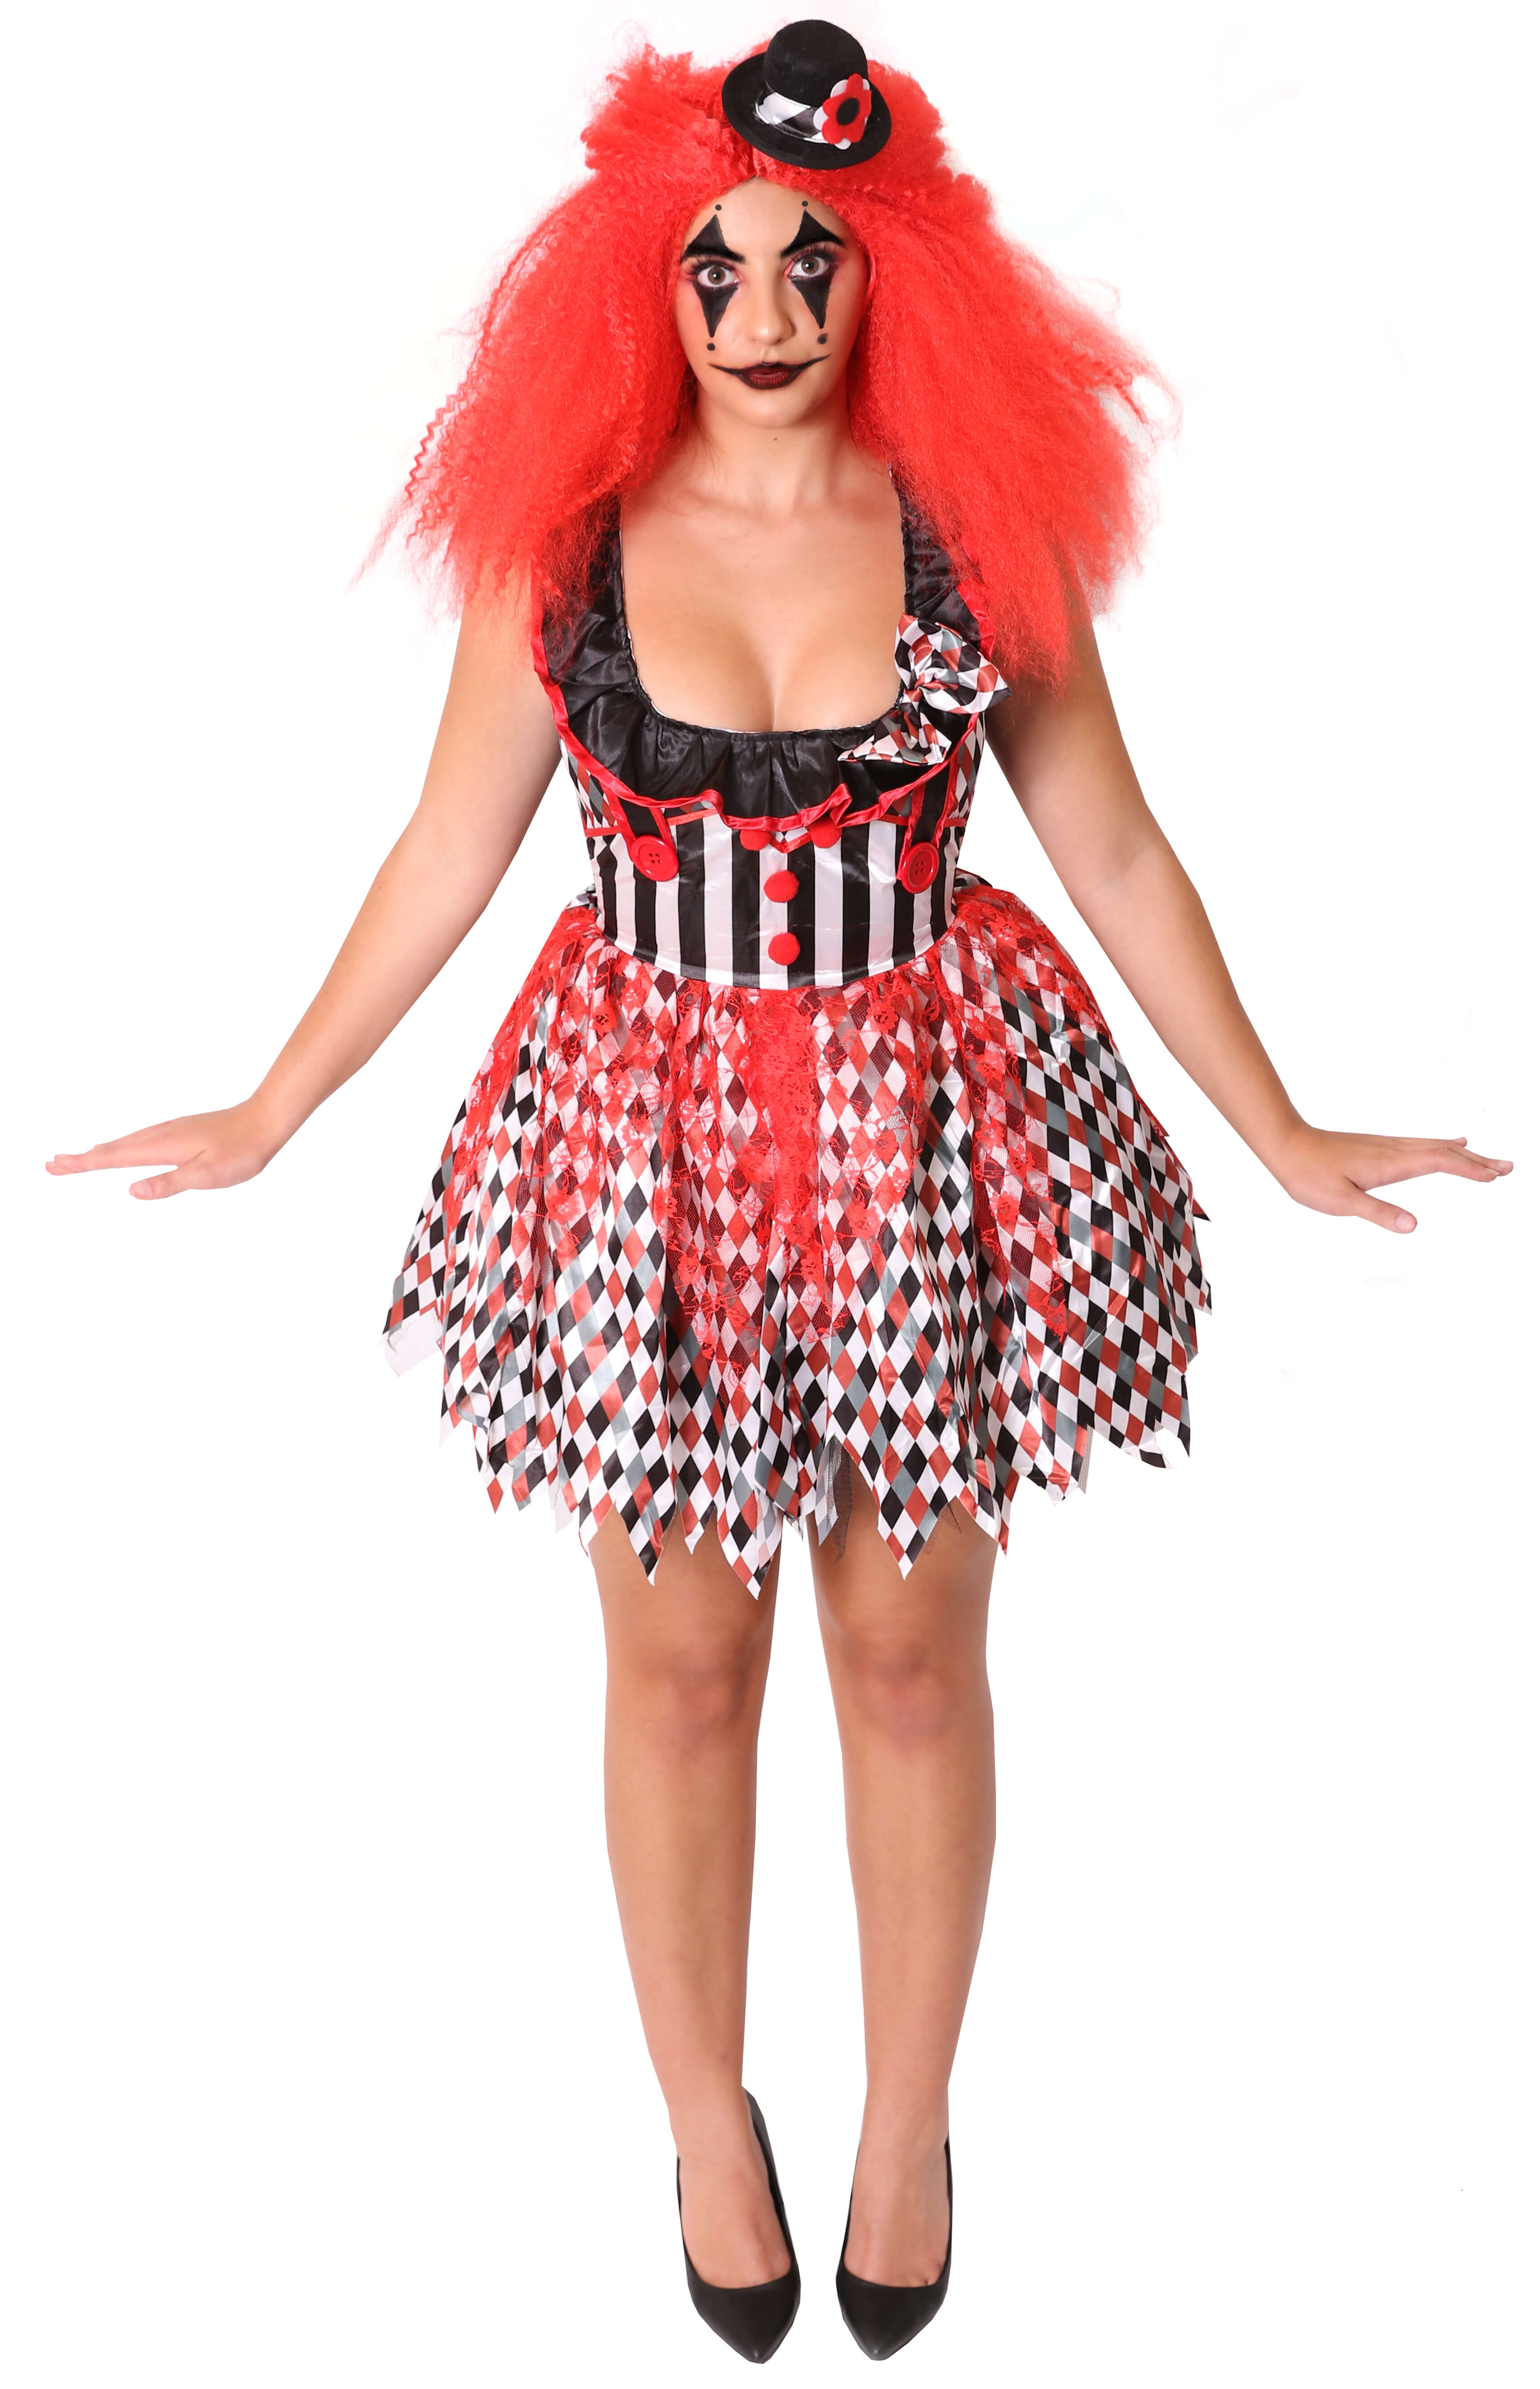 Beautiful Circus Clown Costume Halloween Party Clothes Cosplay Women S Pretty Clown Costume Buy